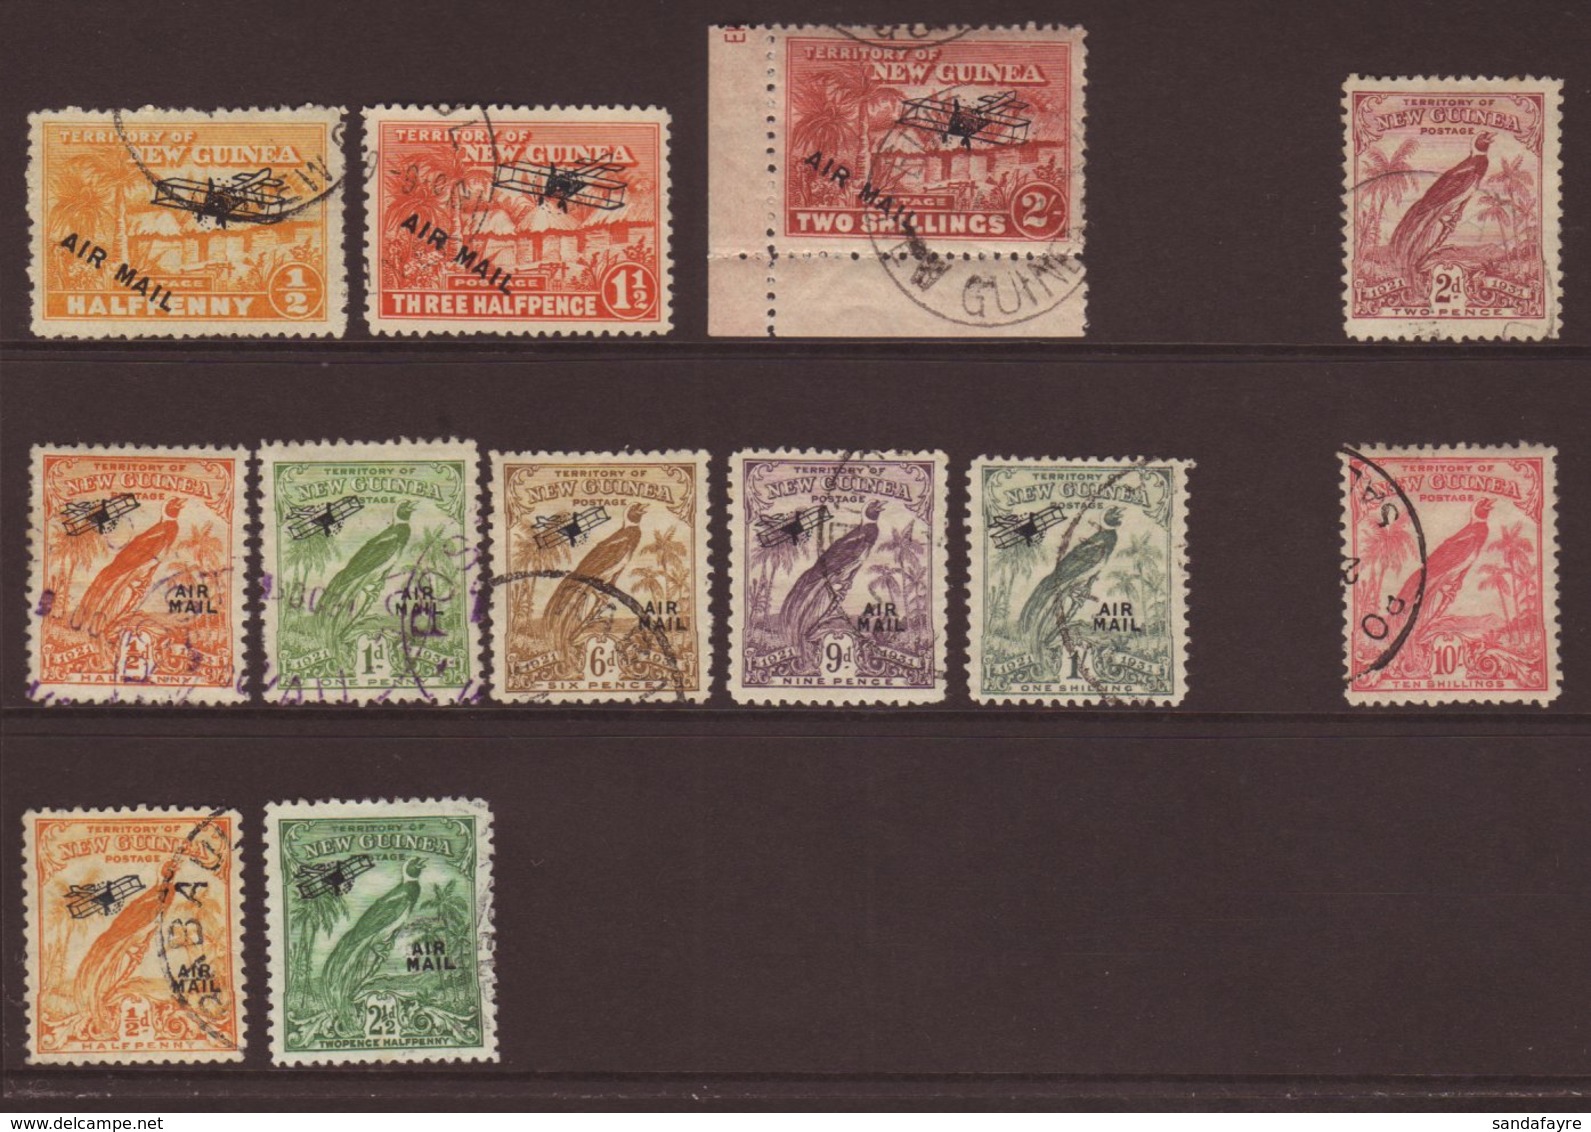 1925-34 A Useful Fine Used Range Incl. 1931 Village Air 2s, 1932-34 10s Etc. (12 Stamps) For More Images, Please Visit H - Papúa Nueva Guinea